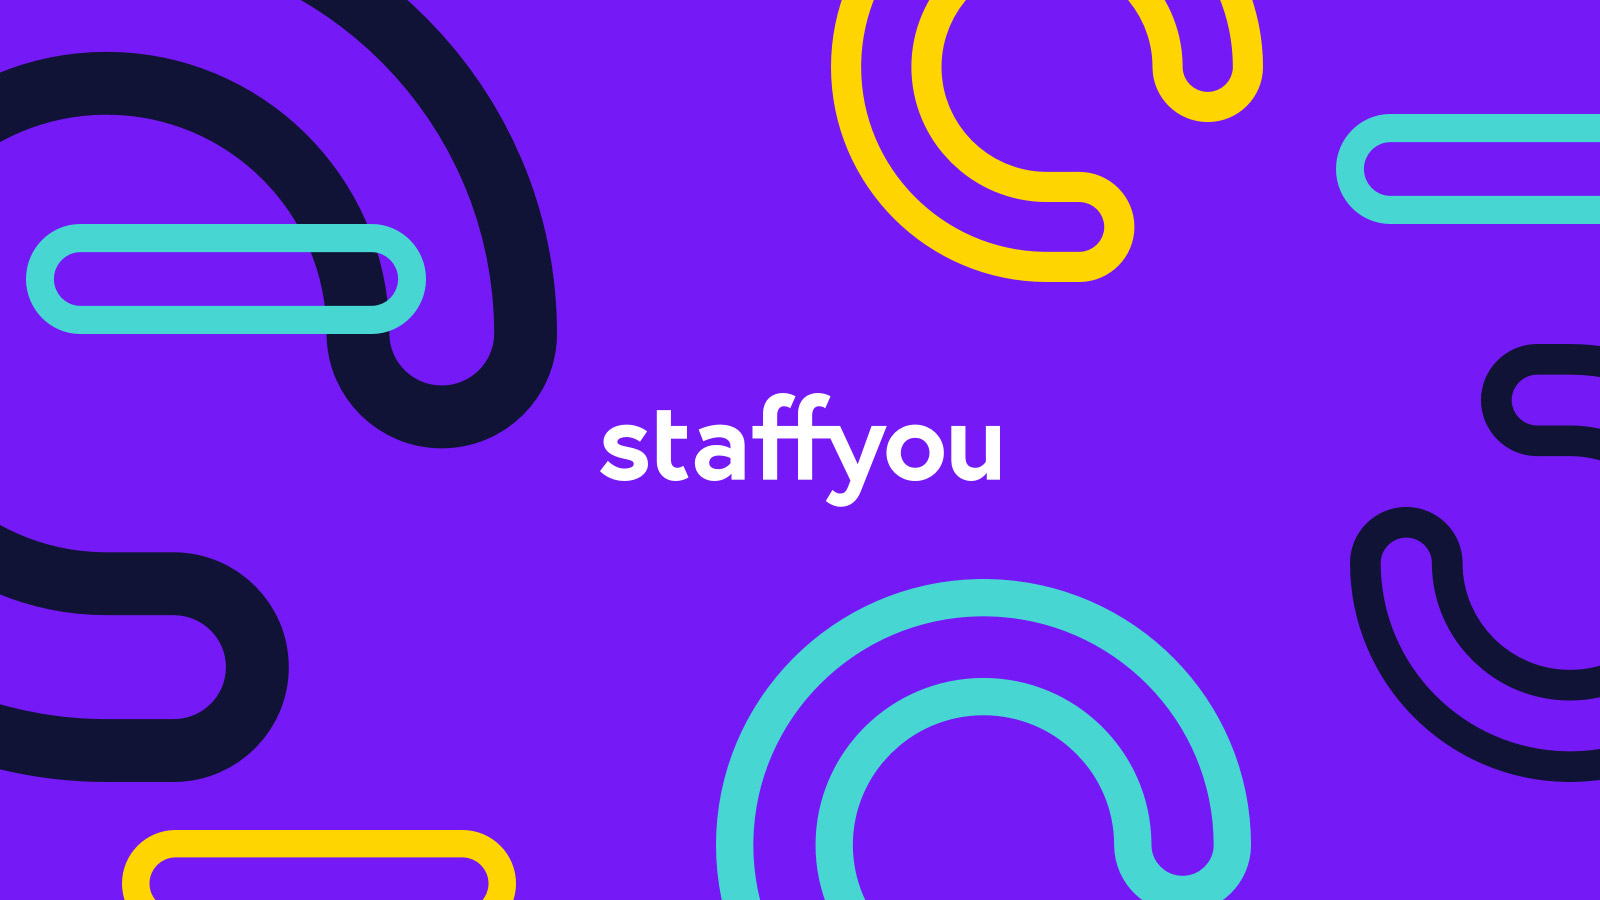 A young, bold rebrand and website for staffing platform Staffyou